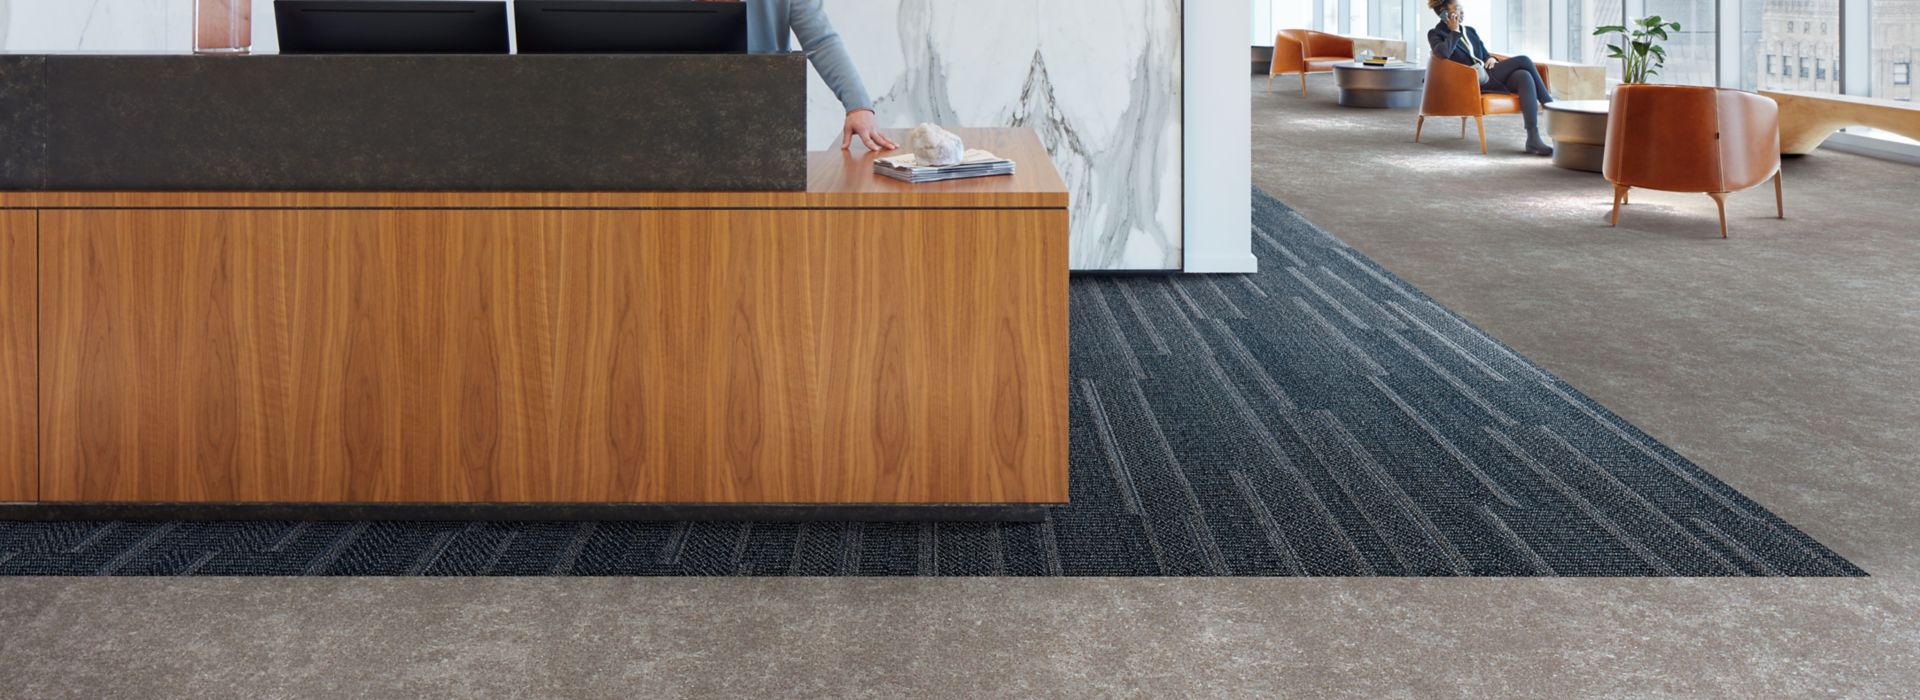 image Interface Simple Sash plank carpet tile and Walk of Life LVT in a corporate lobby area with front desk  numéro 1